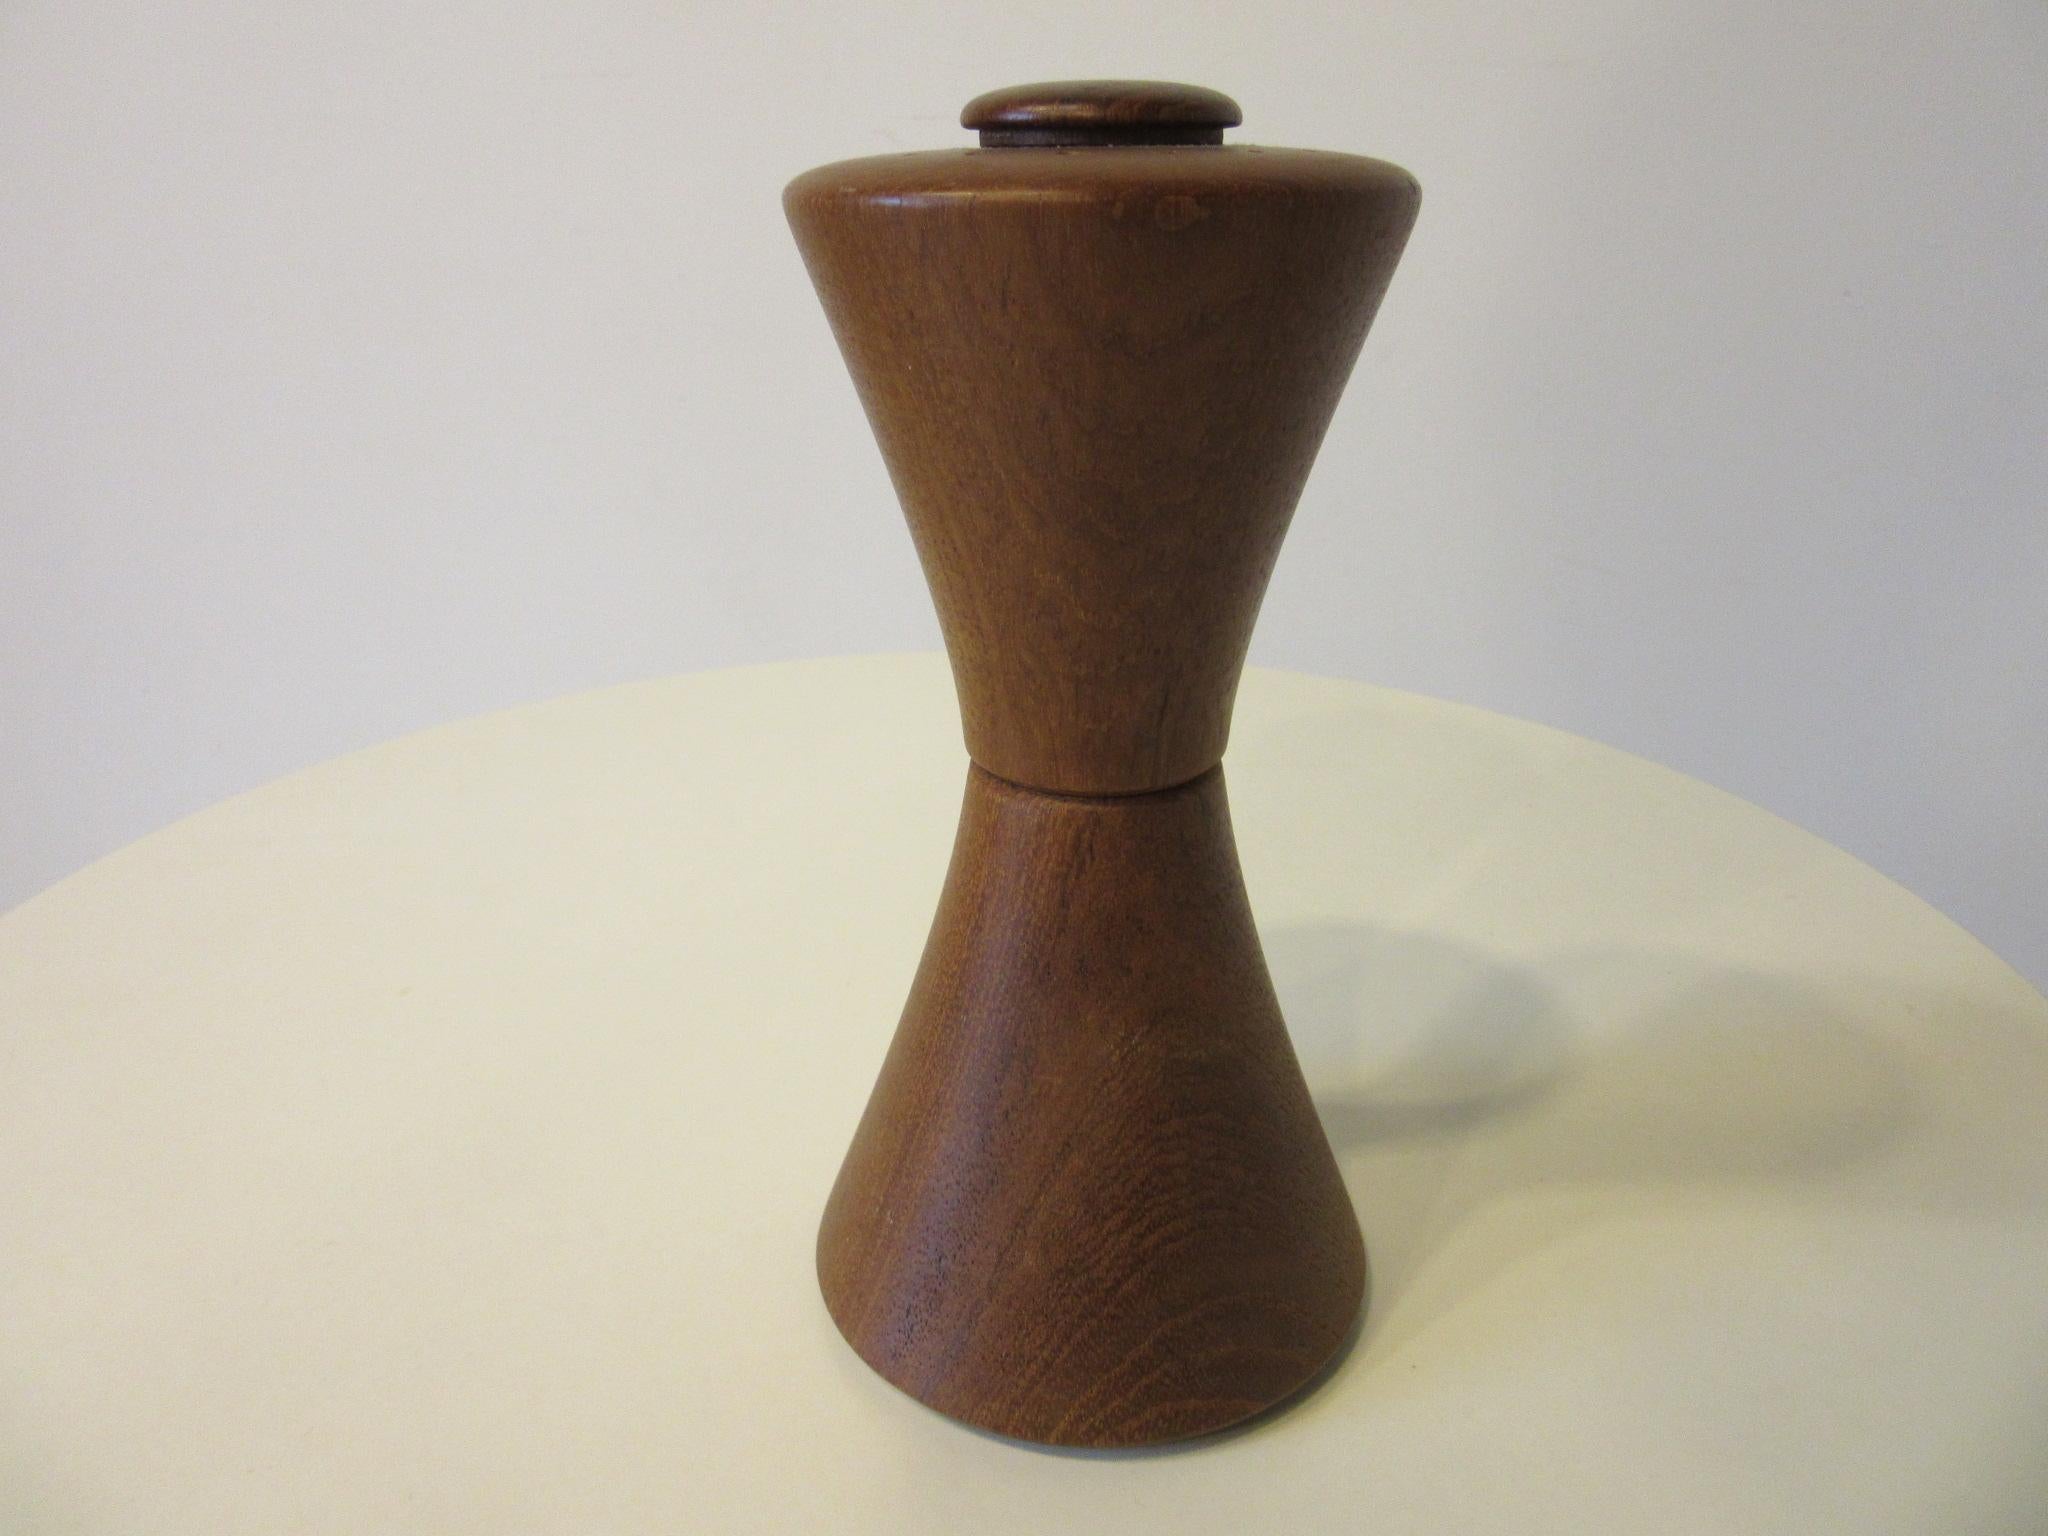 20th Century Dansk Salt and Pepper Mill by Jens Quistgaard